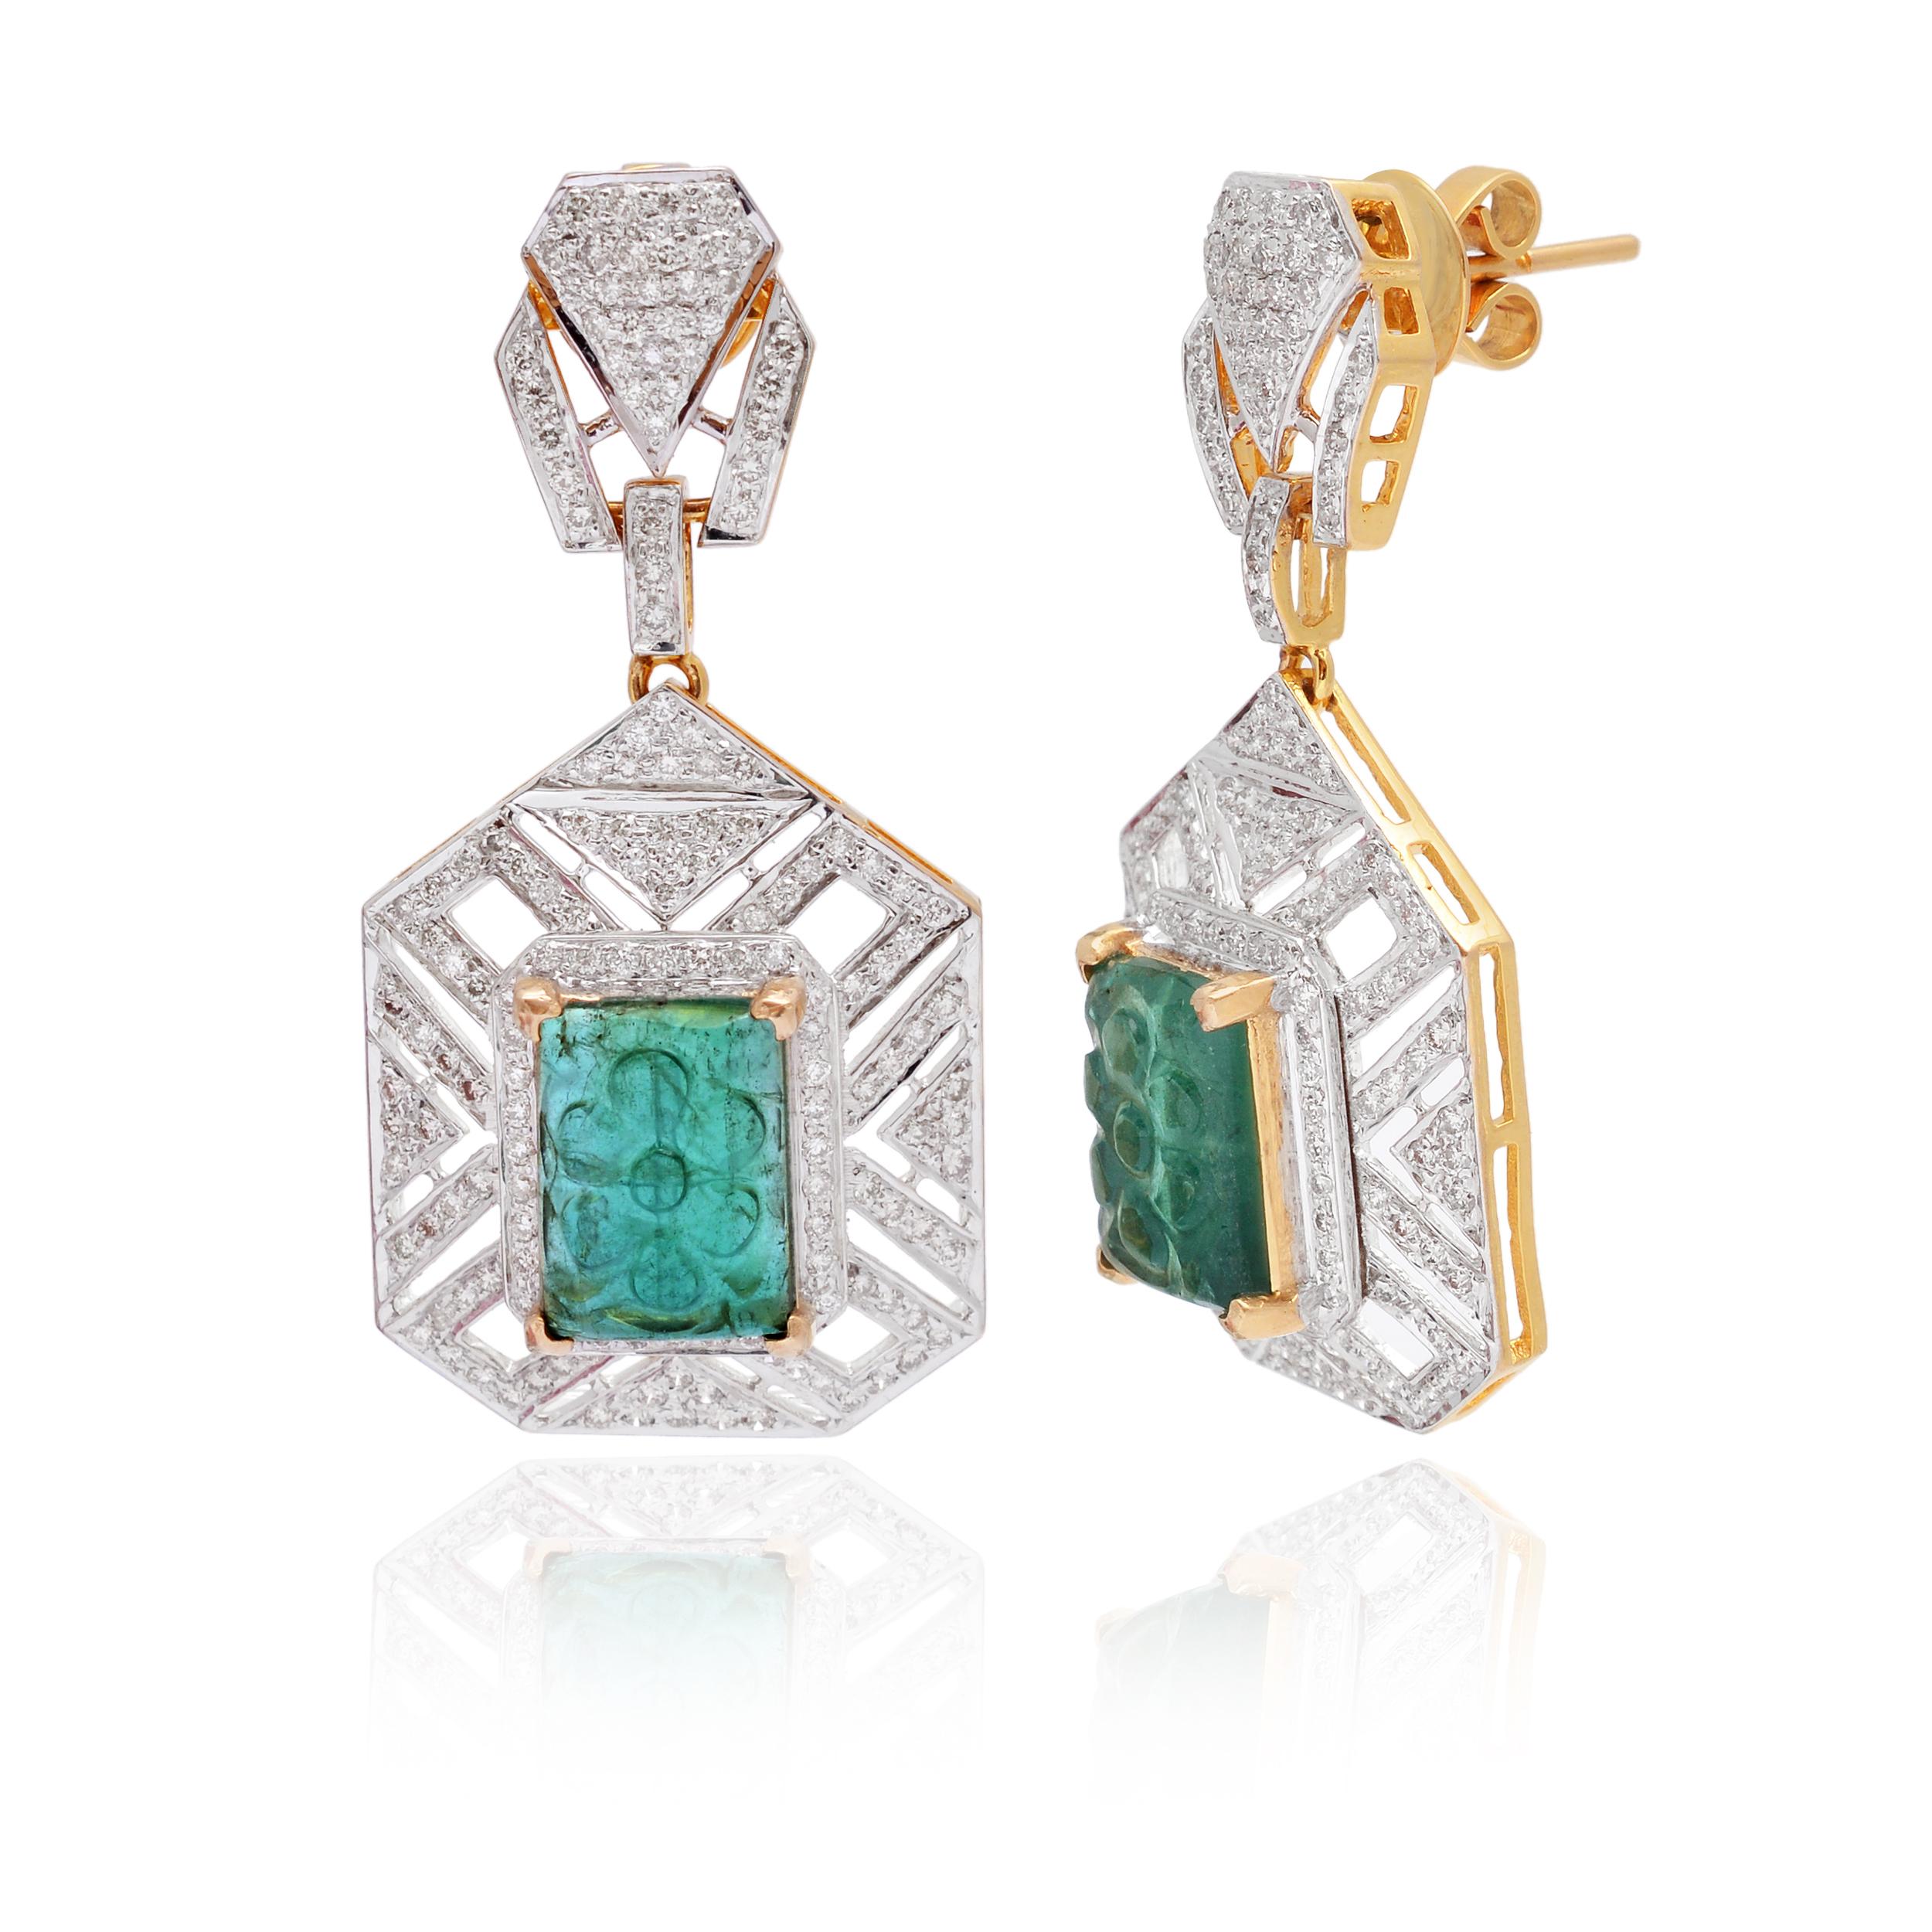 Made with 14K Solid Yellow Gold and 2.26 Ct Natural Diamond (G-H Color, SI1-SI2 Purity) Emerald Gemstone, these earrings are a rare find. With their soft and fluid shapes, these striking earrings add a new dimension to your style and a subtle shine